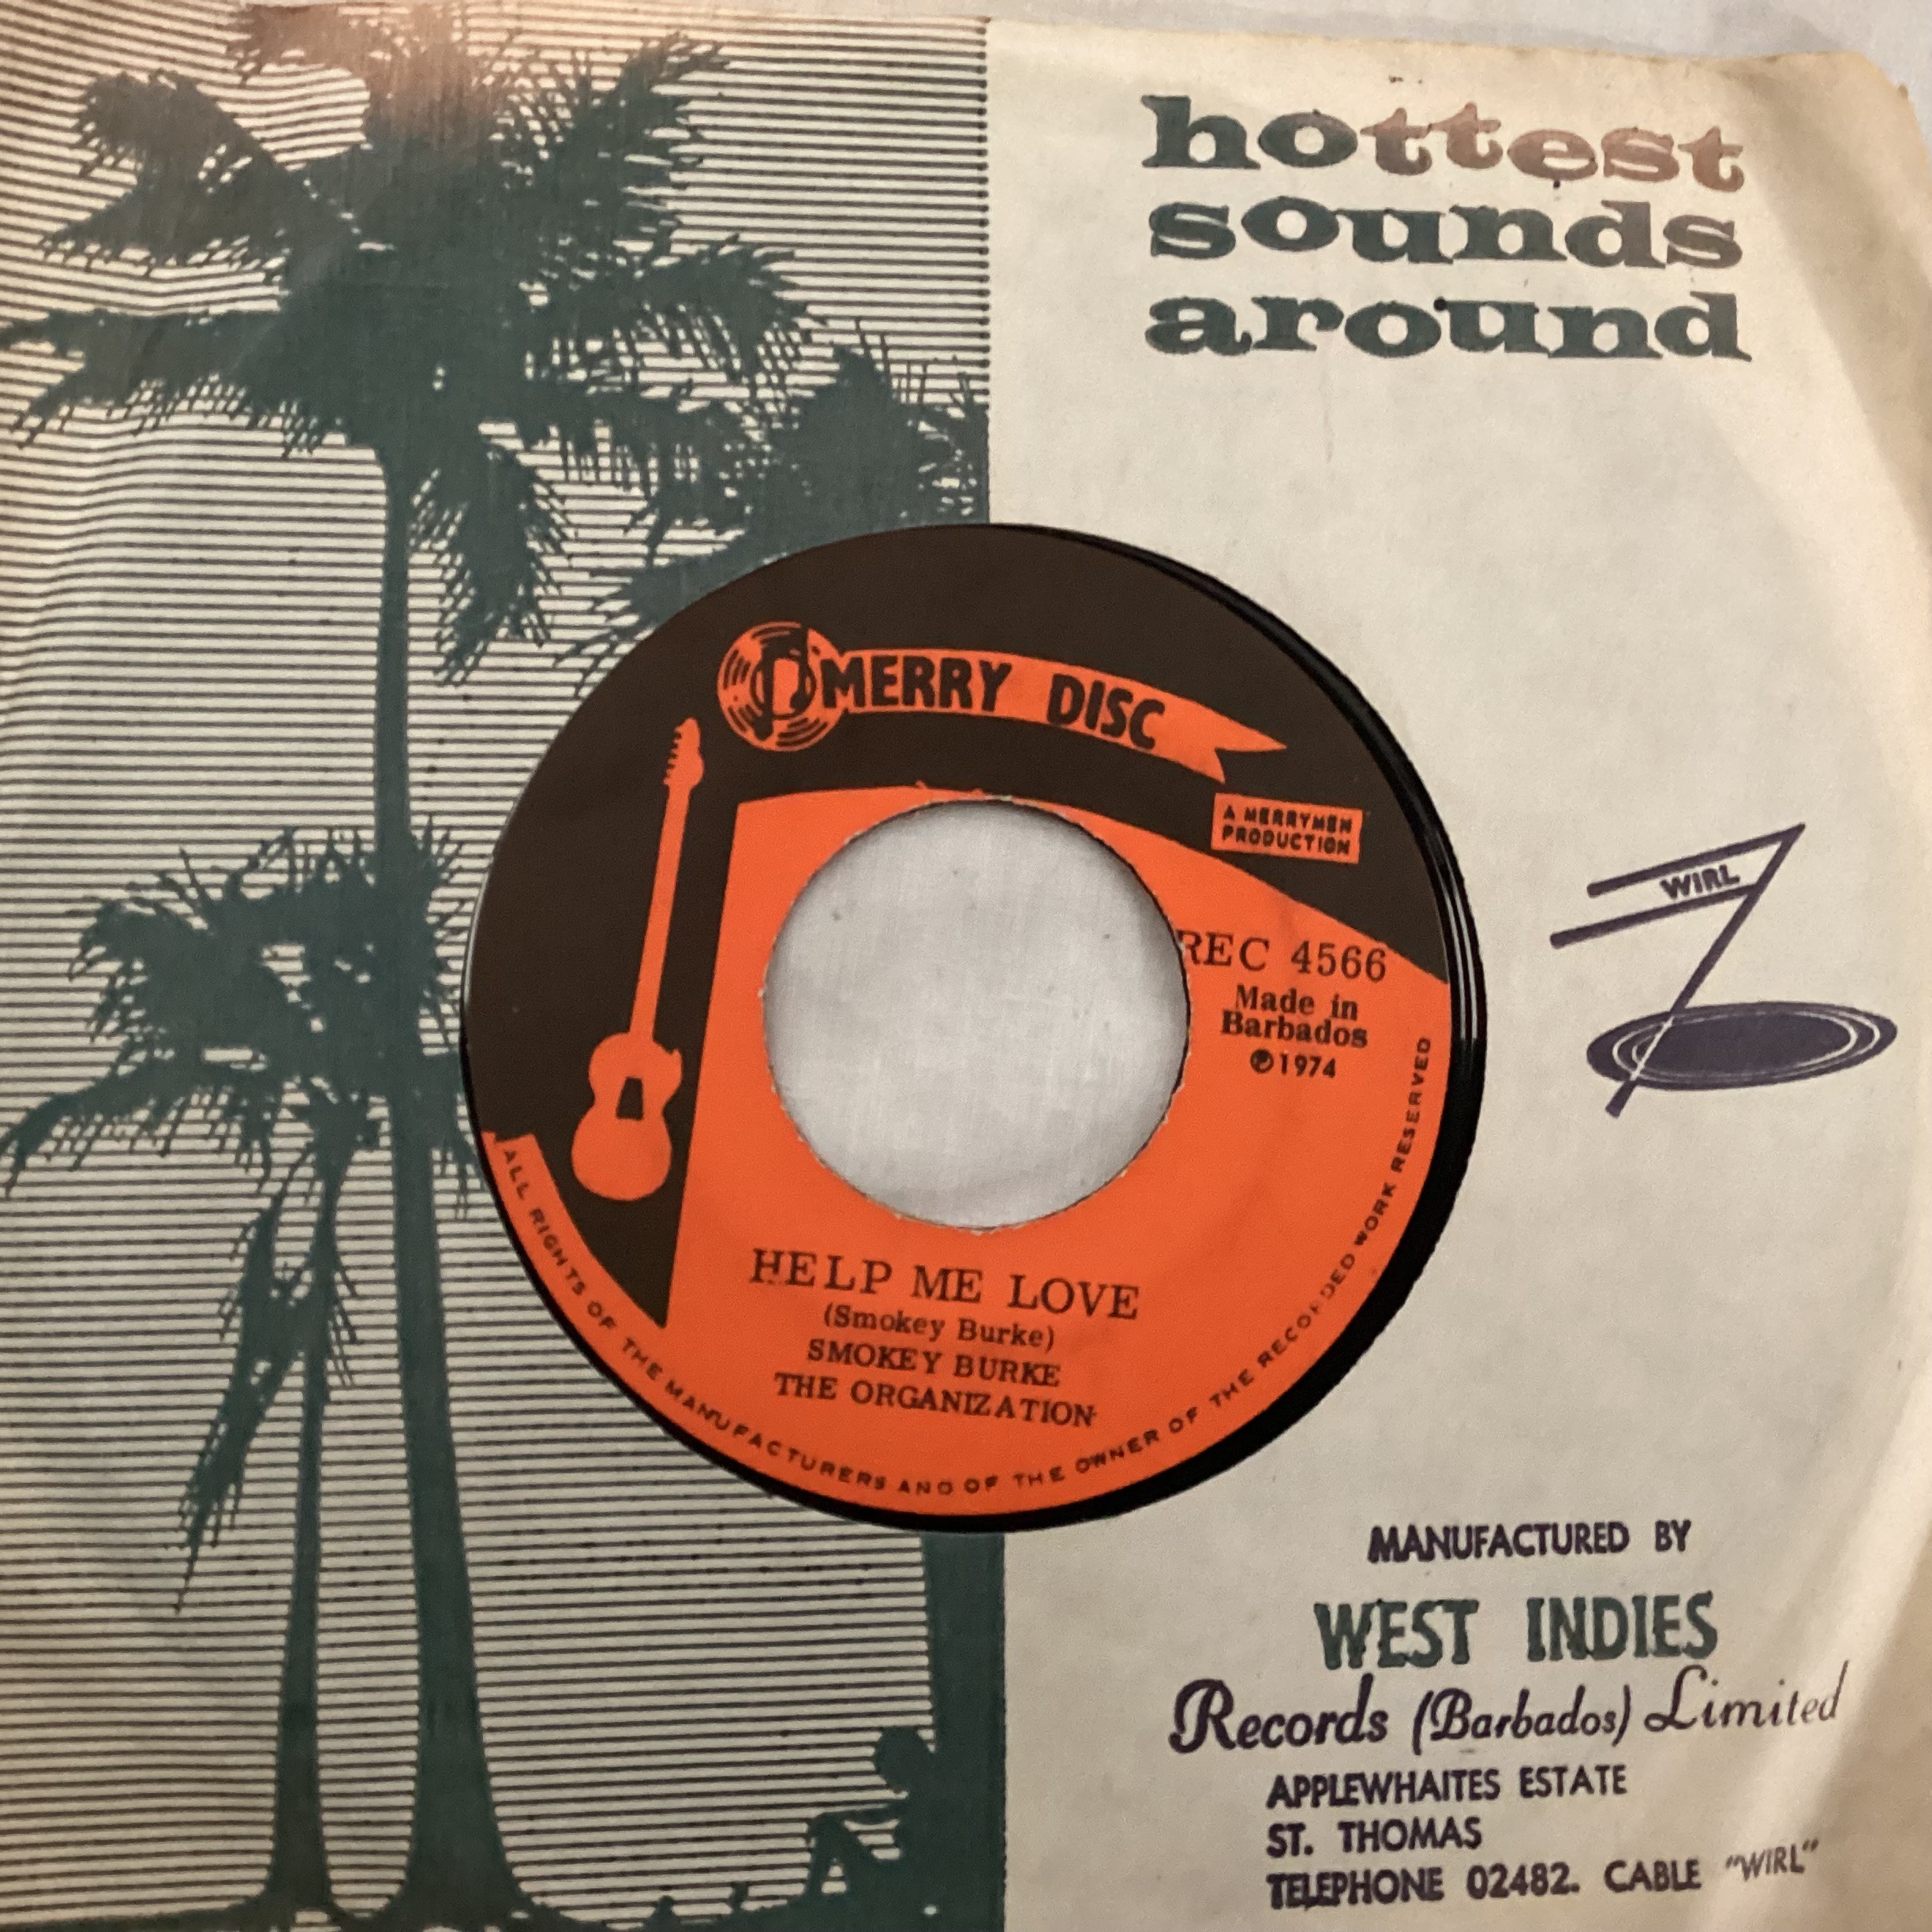 SMOKEY BURKE AND THE ORGANIZATION 7" SOUL FUNK RECORD 'TELL HER I'M SORRY'. - Image 2 of 2